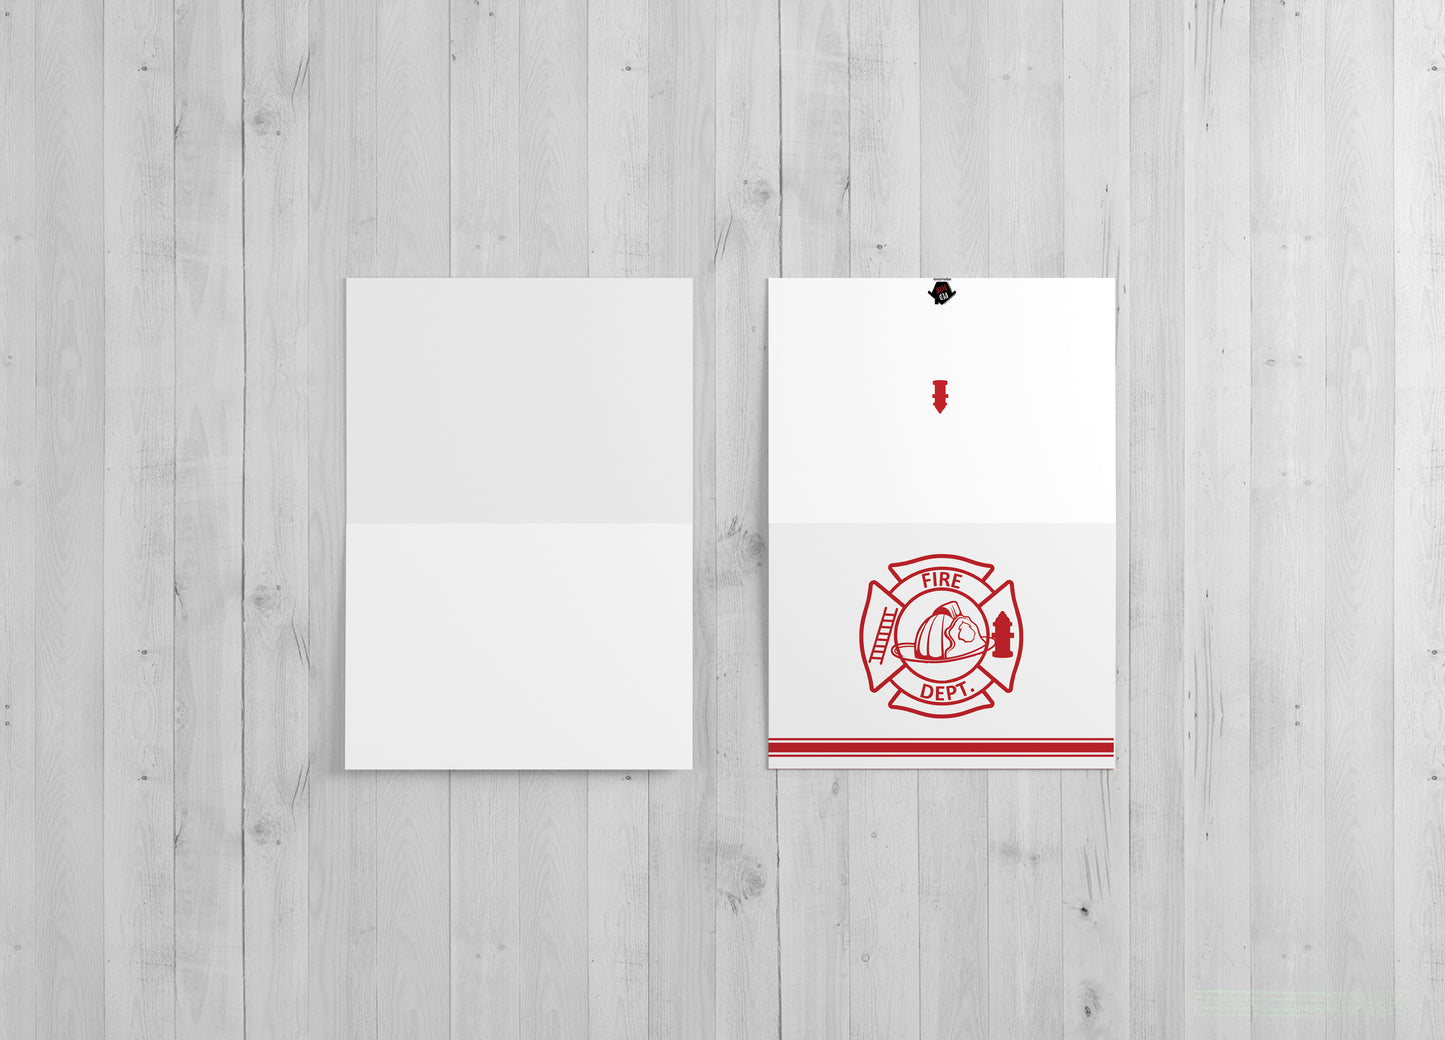 Fire Department Blank Single or Set 10